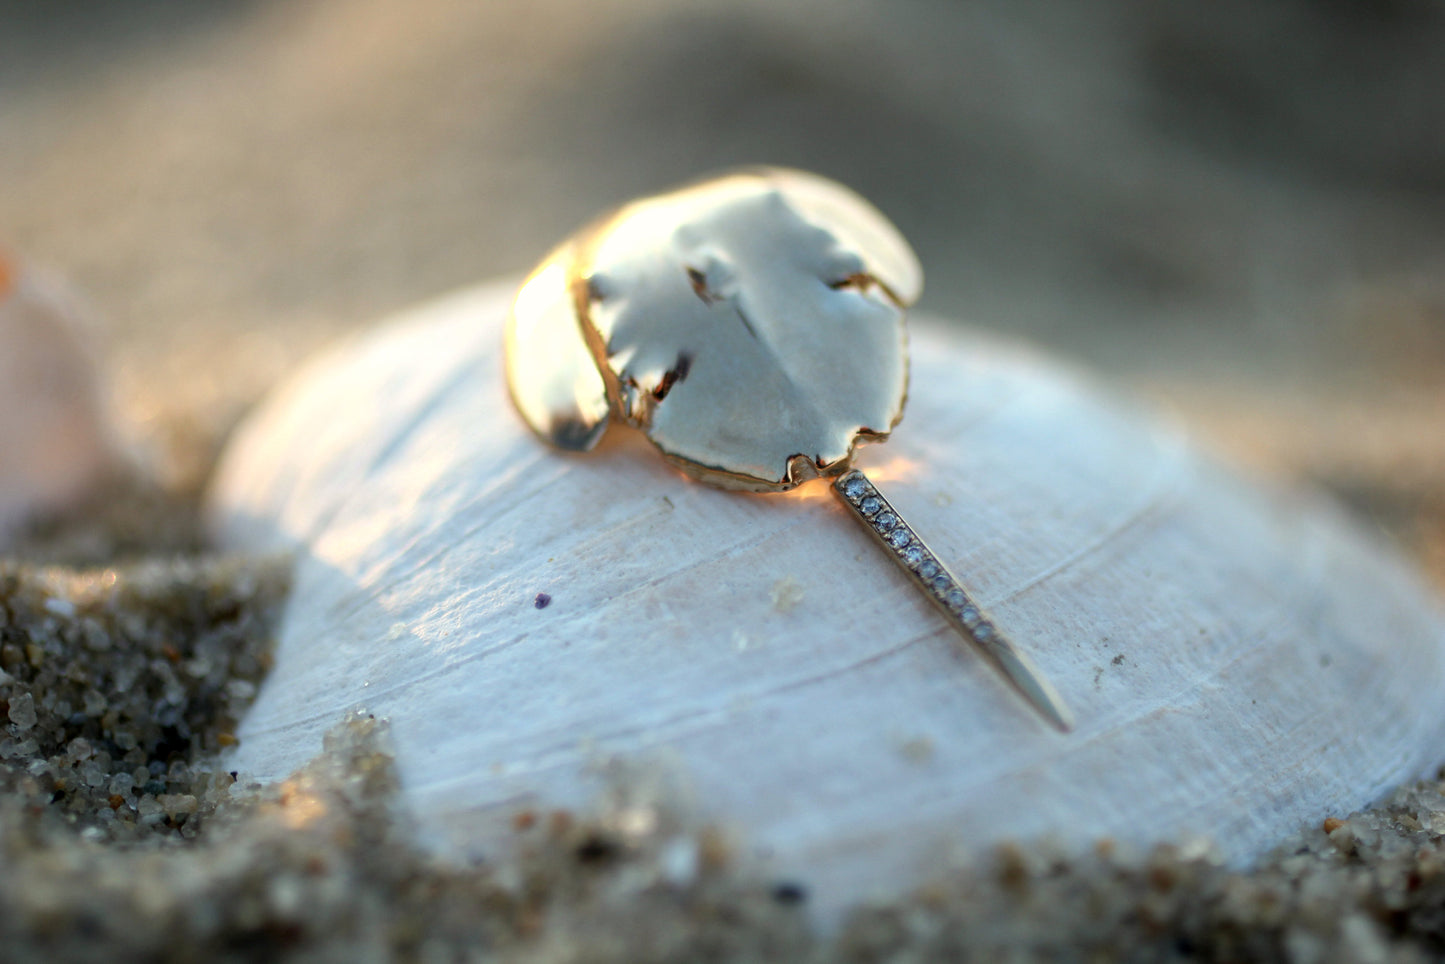 14K Yellow Gold Horseshoe Crab Charm/Pendant with a Pave-Set Diamond Tail handmade by Jewel in the Sea Nantucket